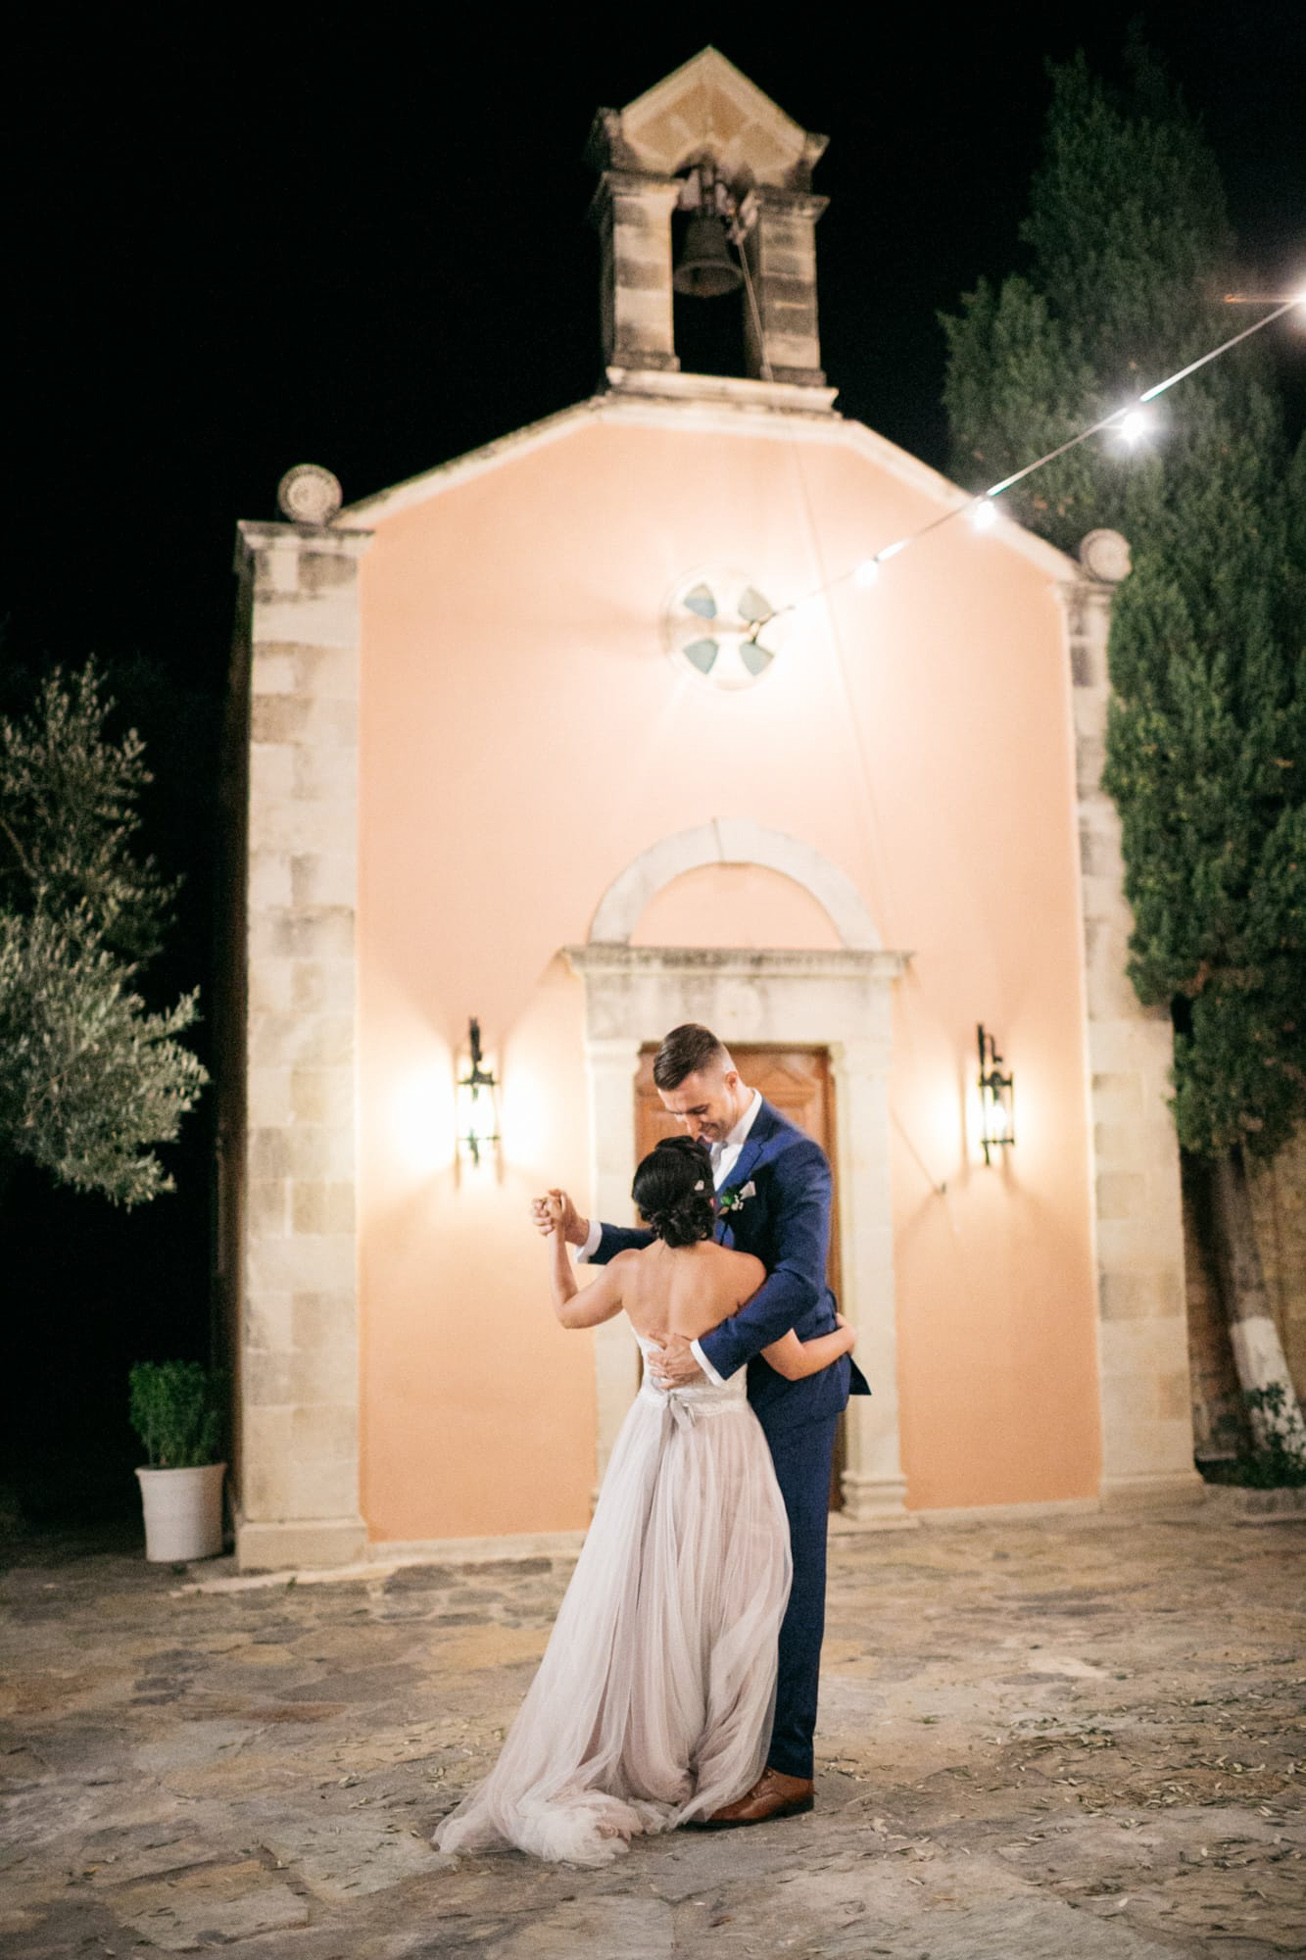 First dance of bride and groom as Mr. and Mrs. in Agreco Farms, Grecotel, Crete, Greece.